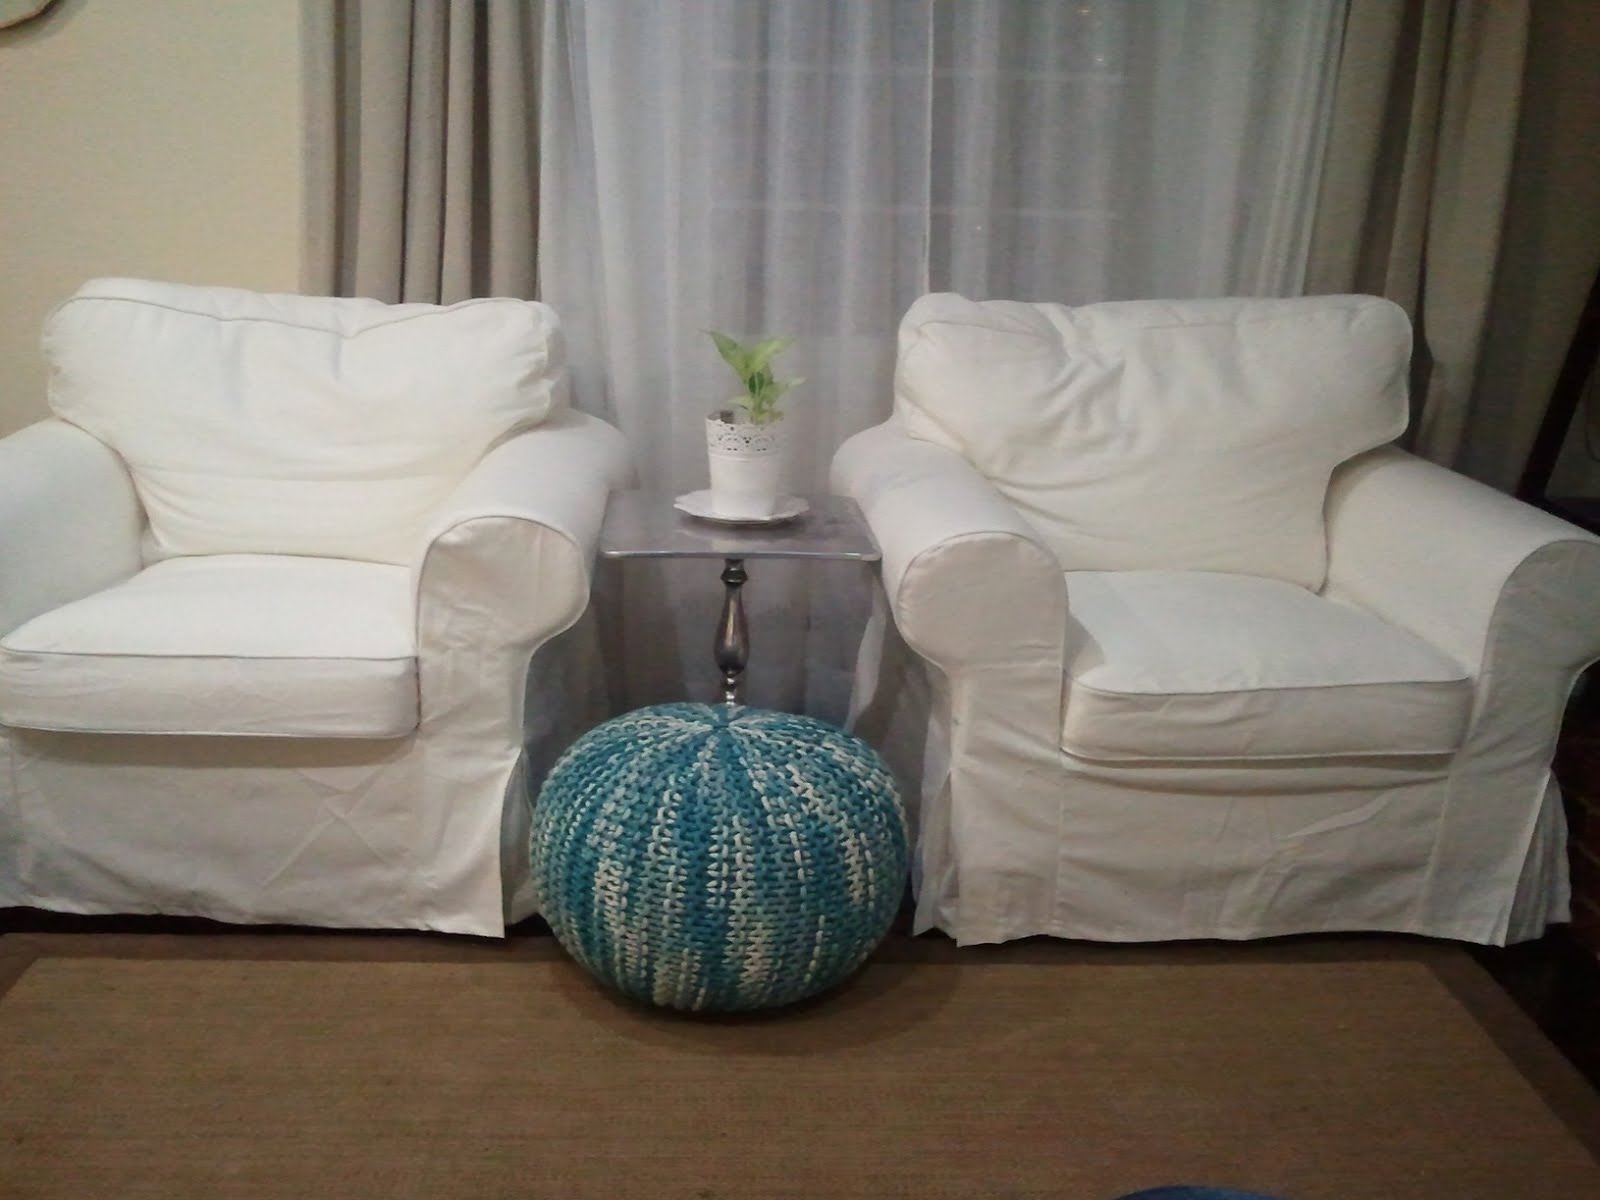 I Dream of Decor: New Living Room Chairs from Ikea!